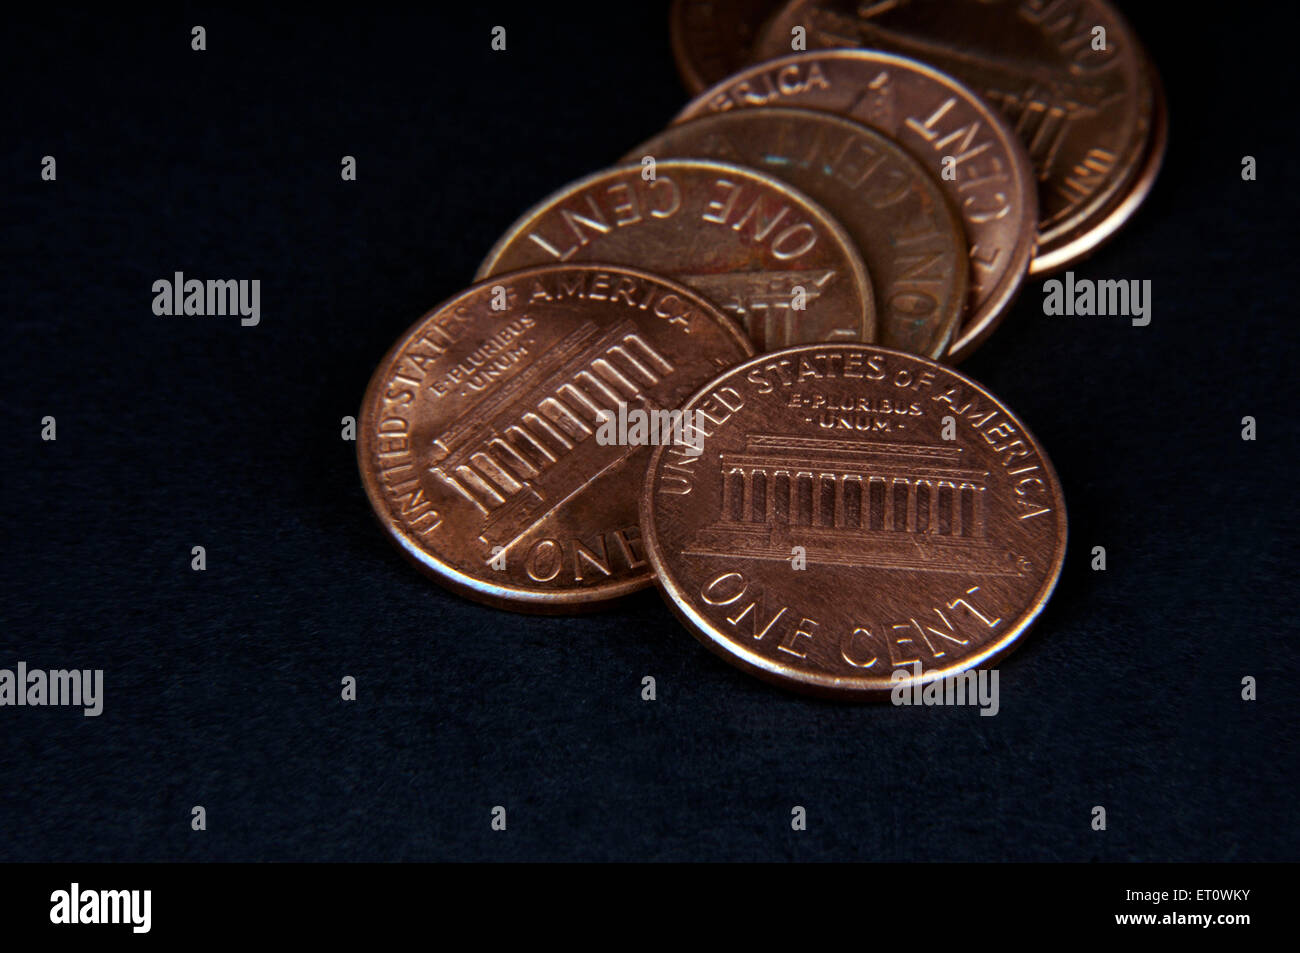 concept of one American cent coin penny Stock Photo